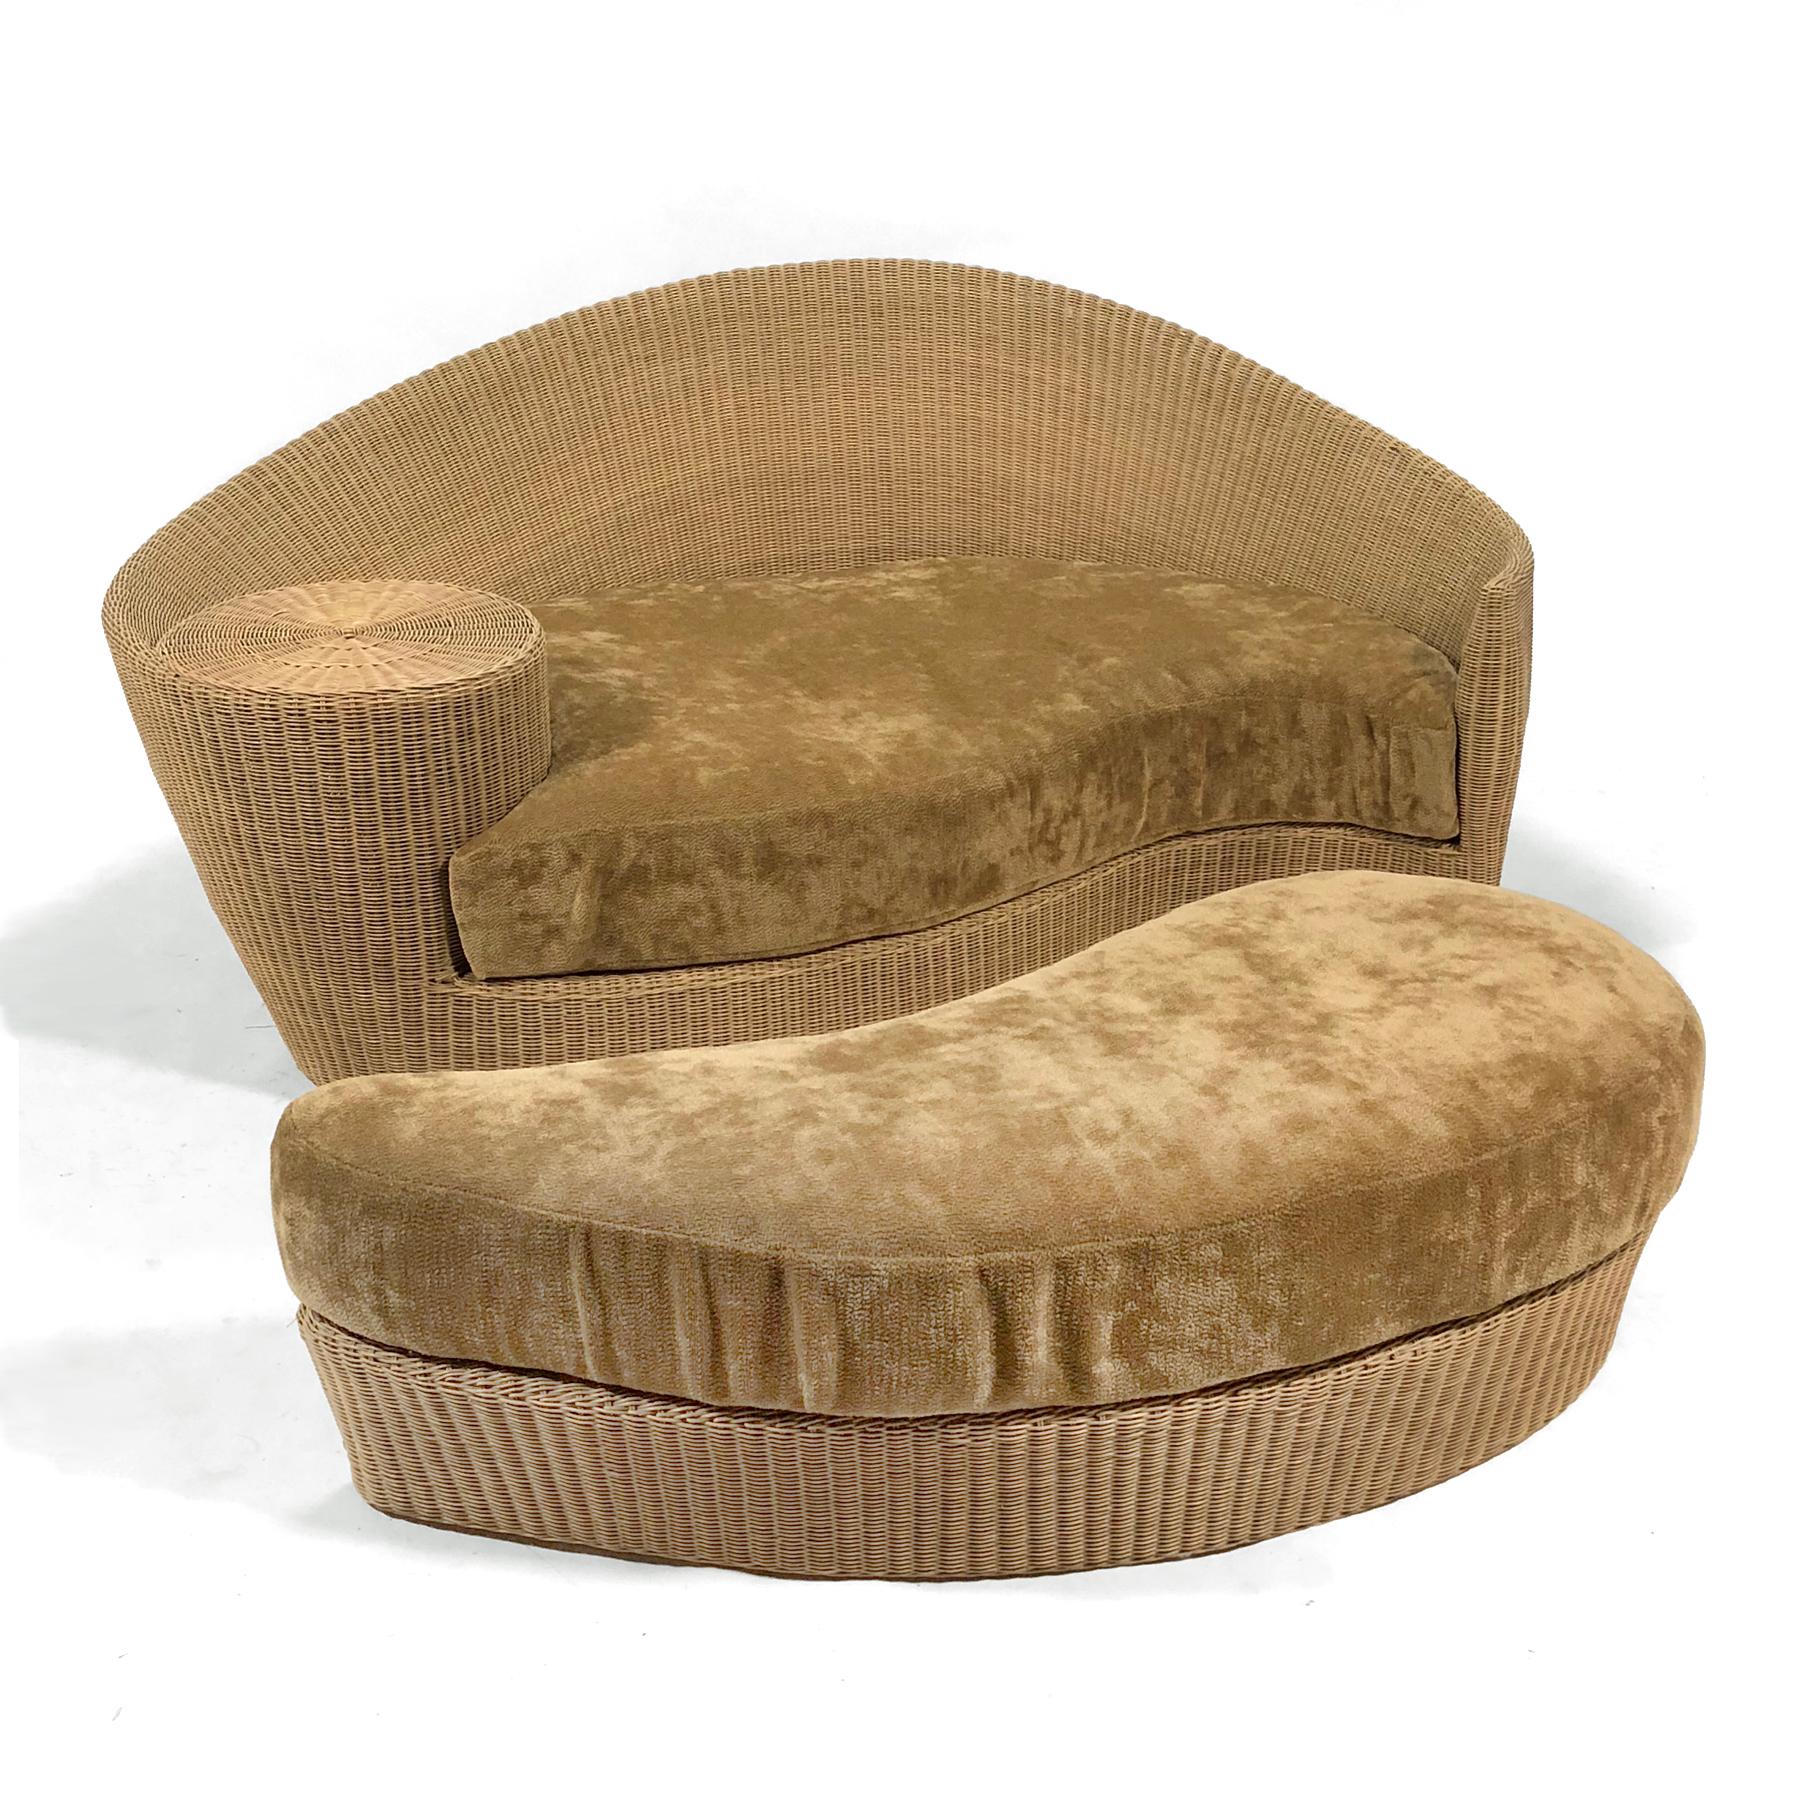 Kagan's design for Barlow Tyrie is a perfect example of his design aesthetic. The undulating, organic form that references a nautilus envelopes the sitter and provides a small table surface. The nesting ottoman increases the seating surface. Crafted